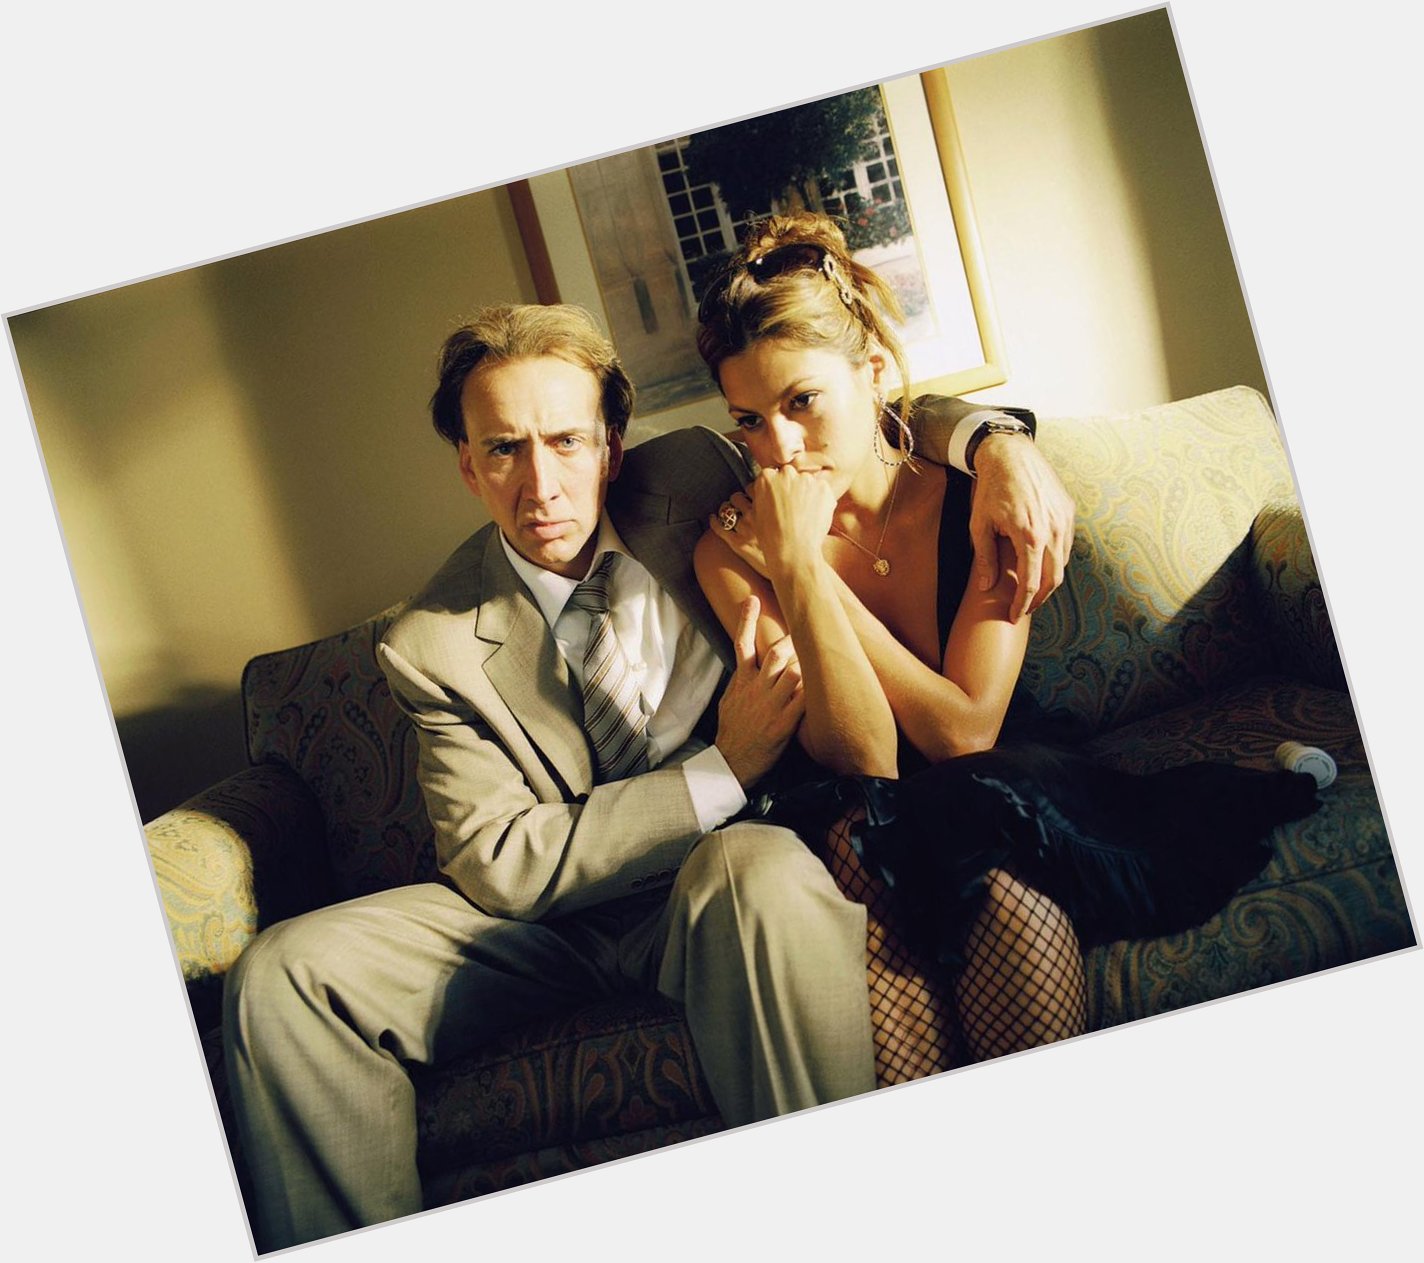 Nicolas Cage and Eva Mendes in BAD LIEUTENANT: POOF CALL NEW ORLEANS  2009.  Happy birthday Mr. Cage. 